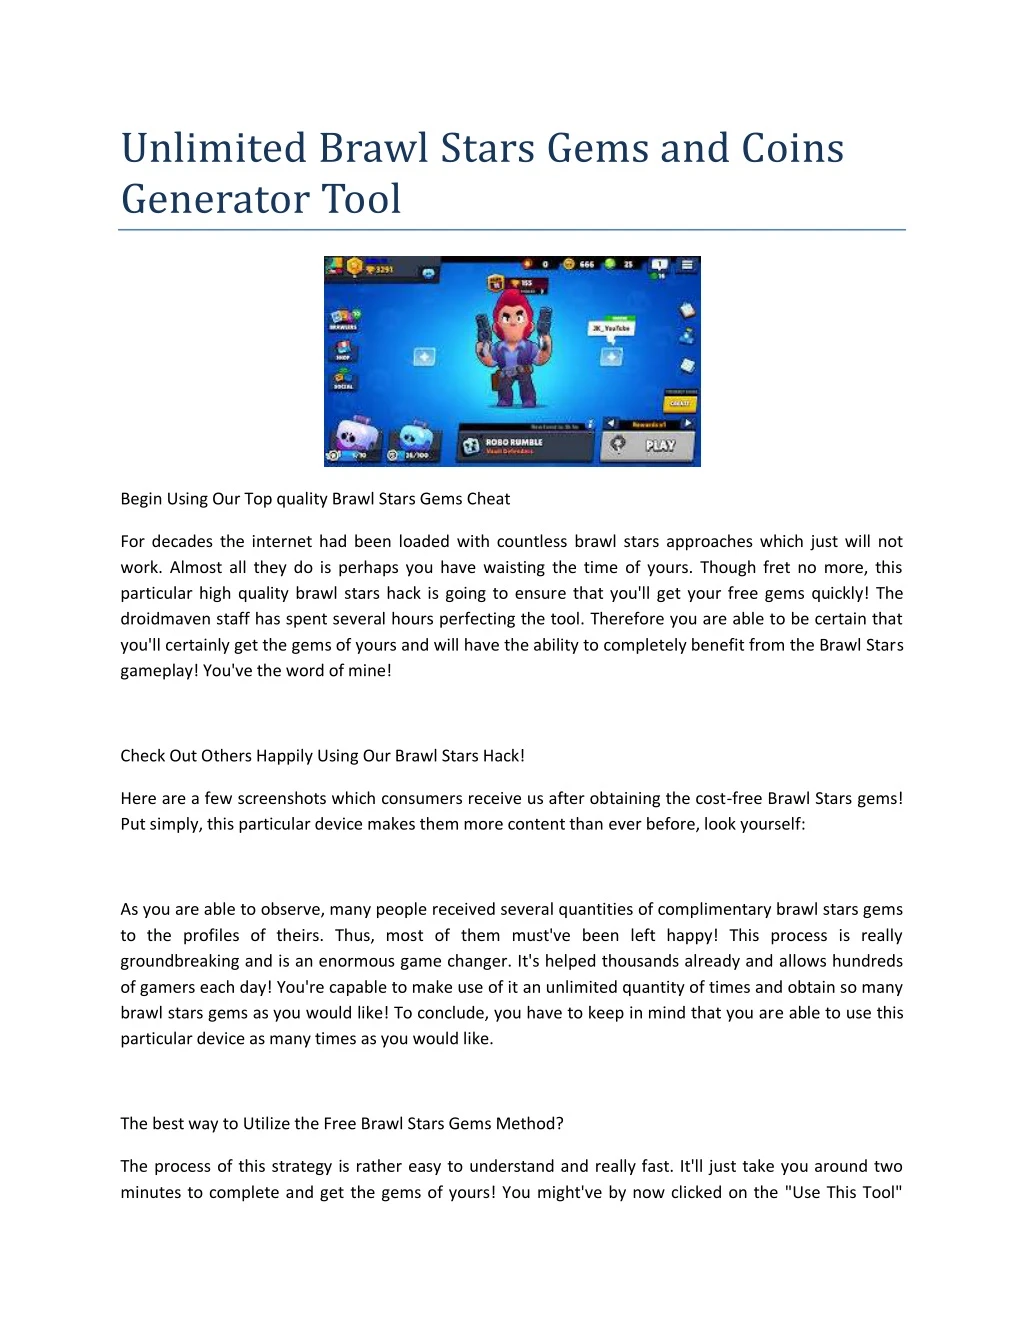 unlimited brawl stars gems and coins generator